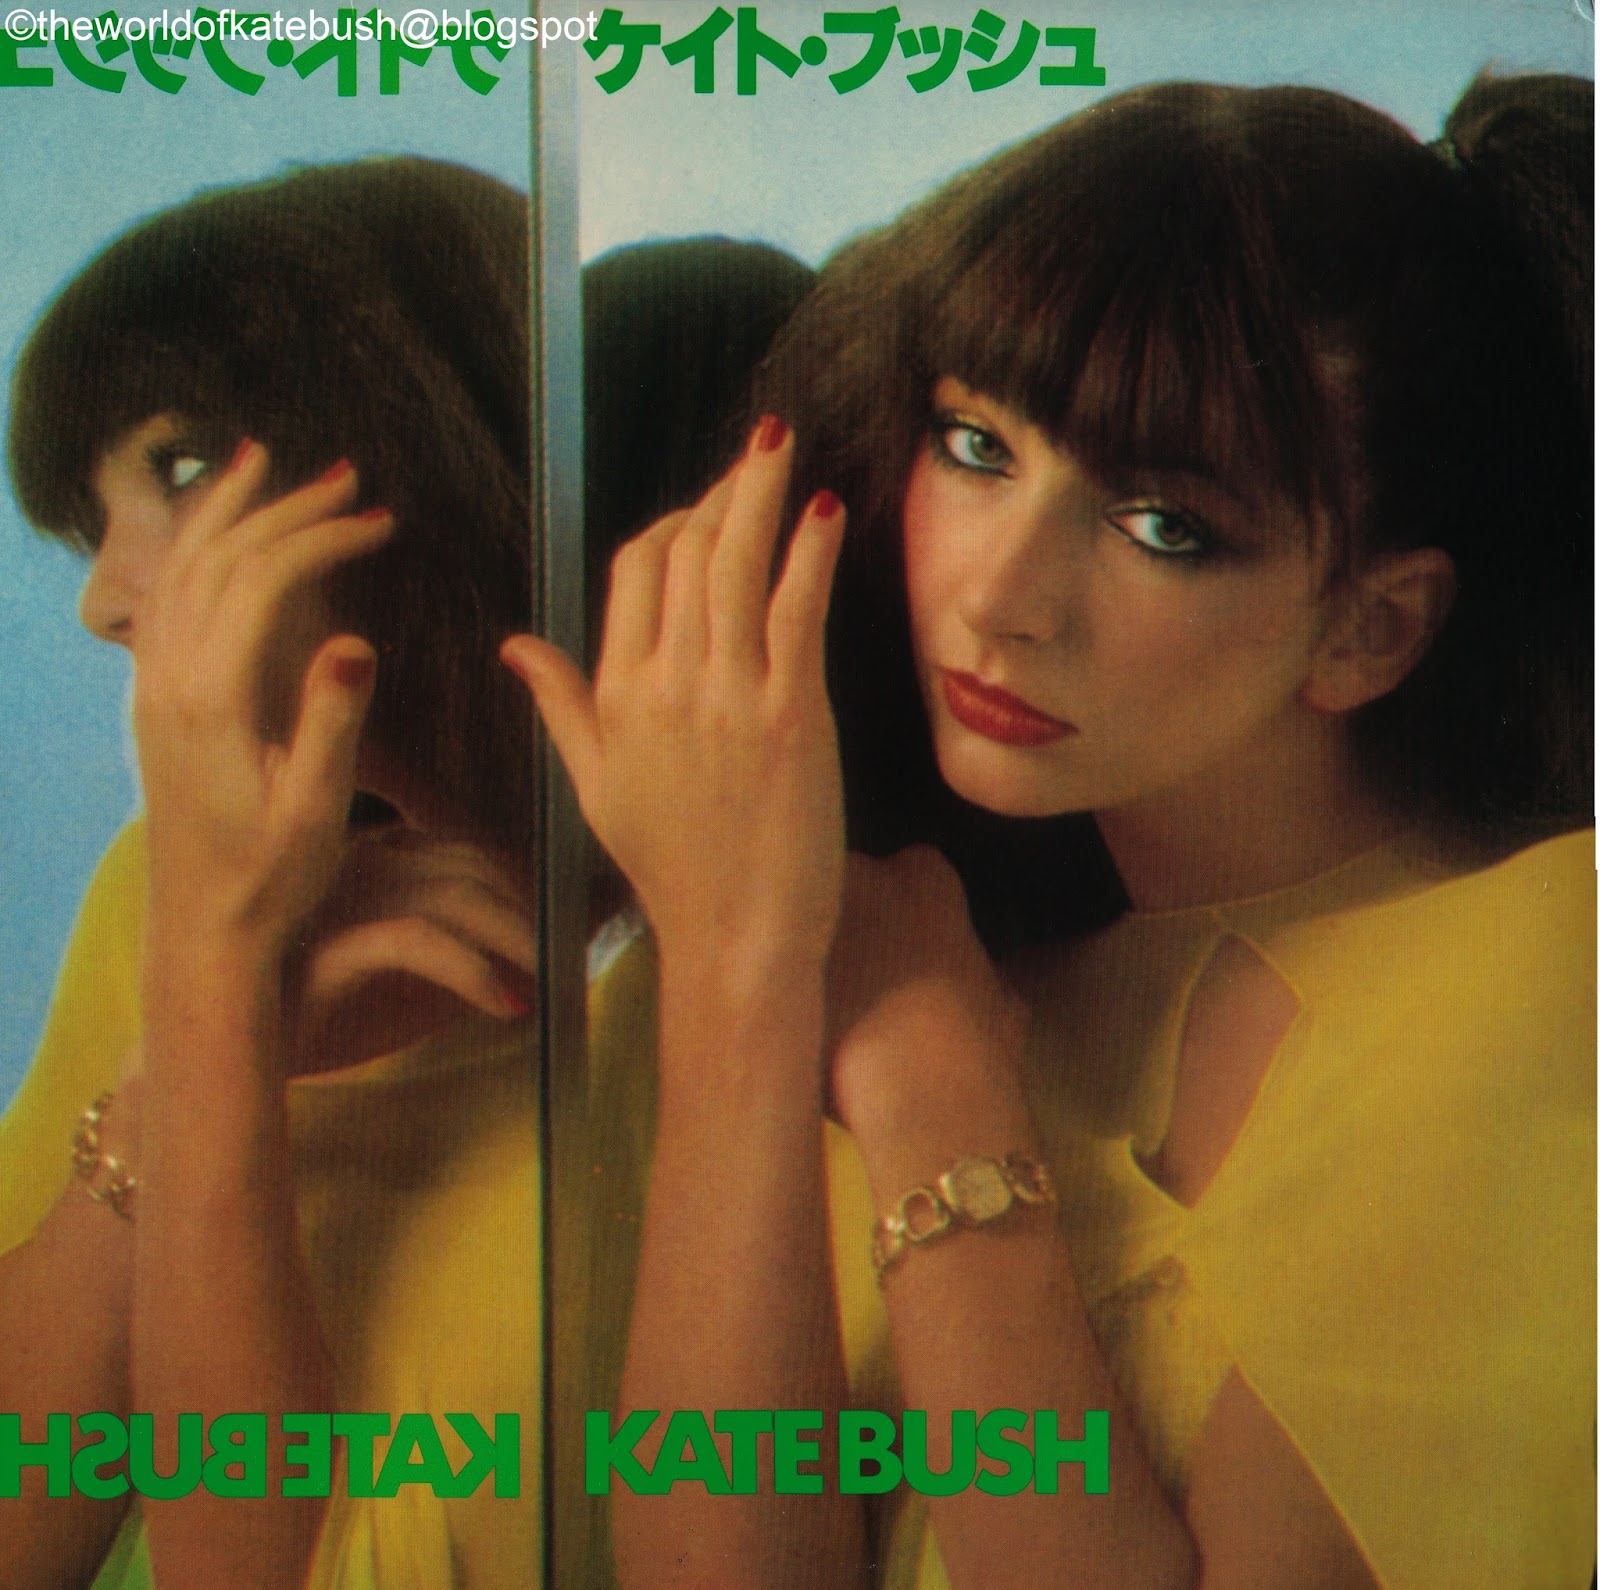 THE WORLD OF KATE BUSH: Live in Manchester 1979 - Bootleg LP